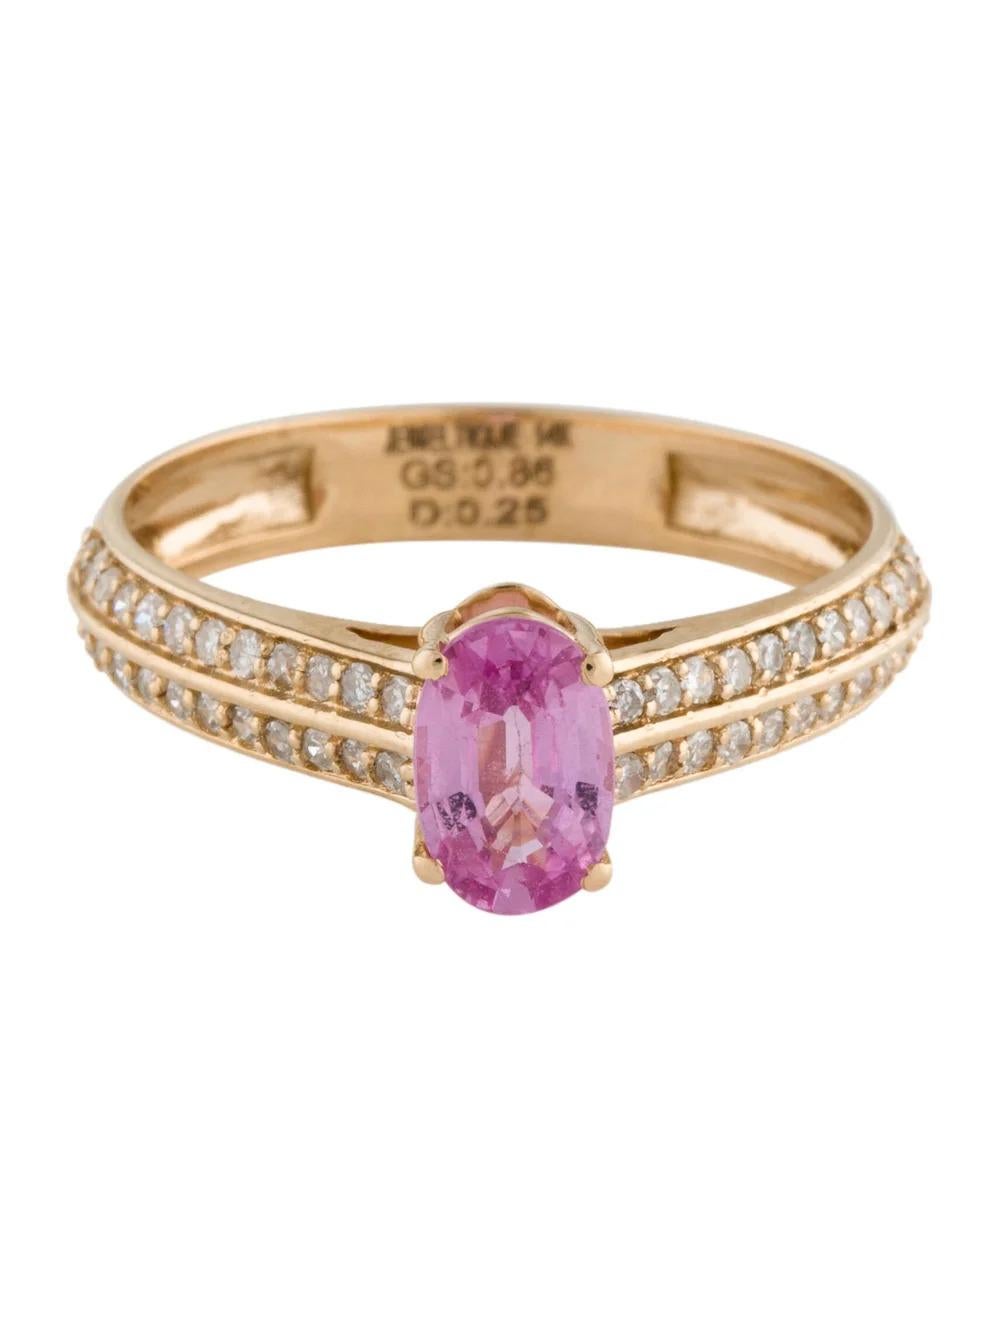 Oval Cut 14K Pink Sapphire & Diamond Cocktail Ring, Size 6.75 - Stunning Elegance For Sale